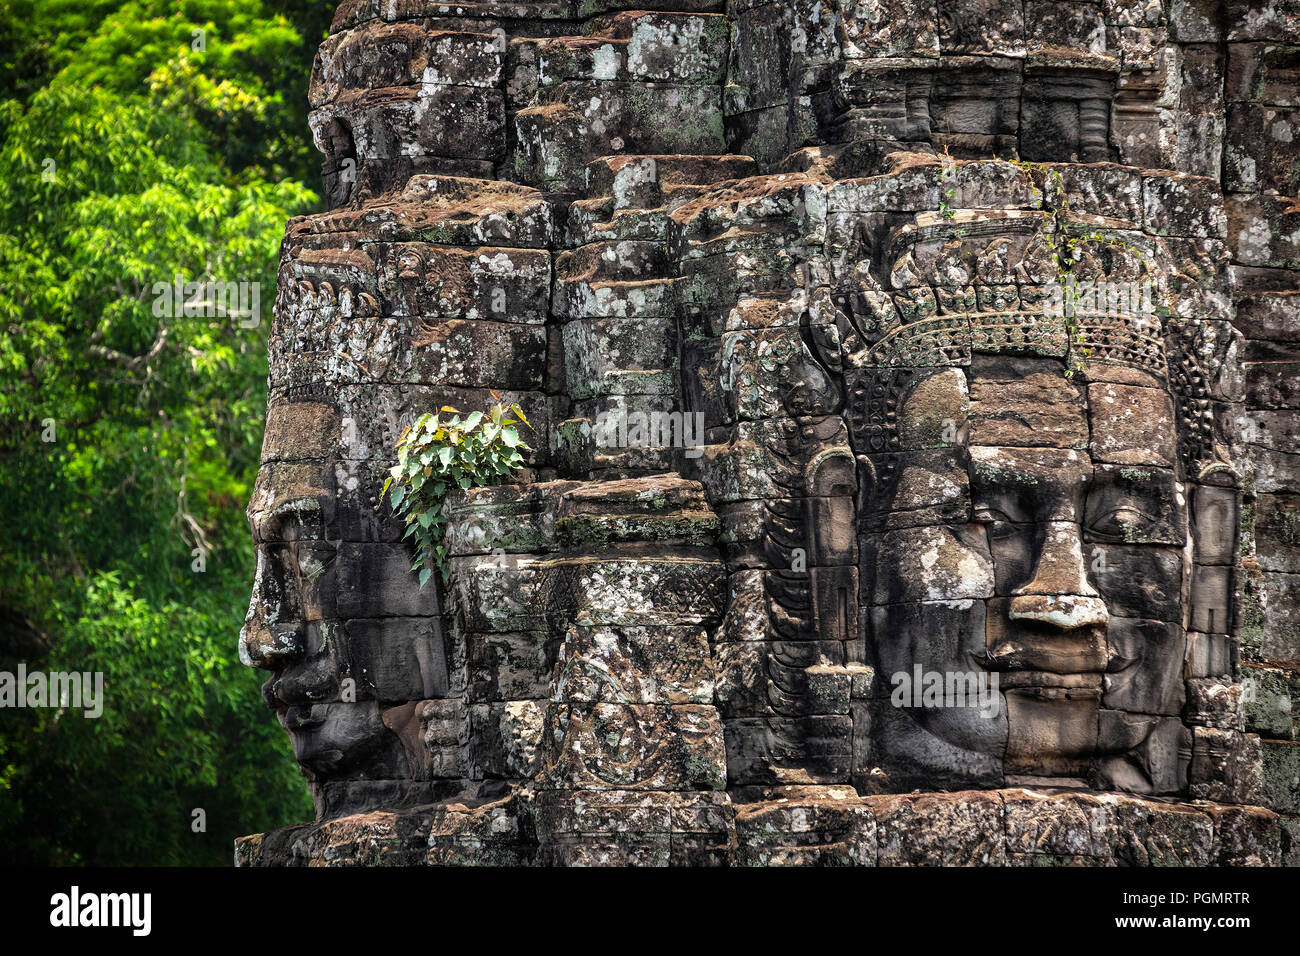 The Bayon, main temple of the ancient town of Angkor Thom at Siem Reap province (Cambodia - Asia). The most famous Cambodian monument. Stock Photo